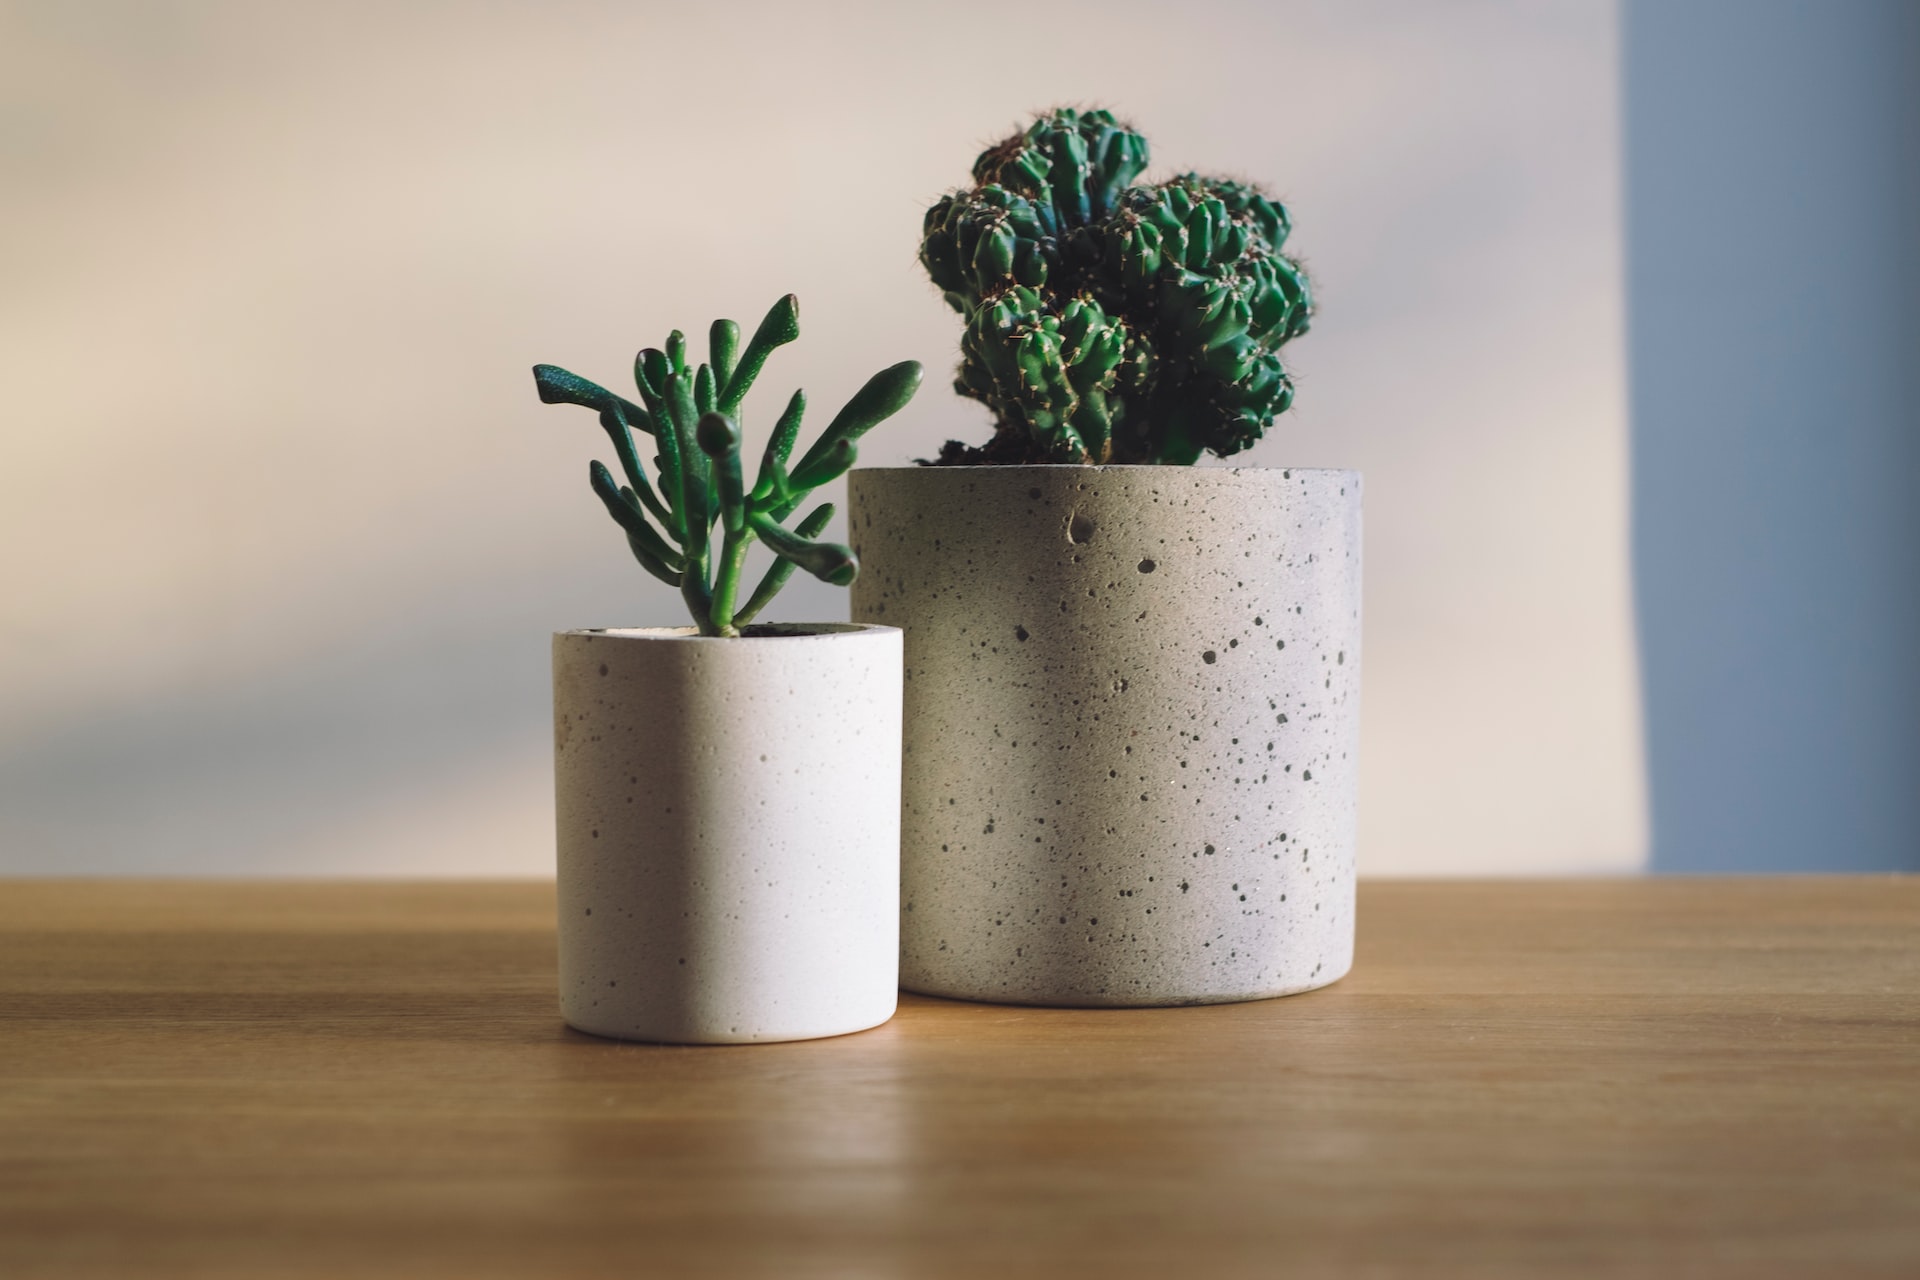 Two plants in cement pots,  placed on a table